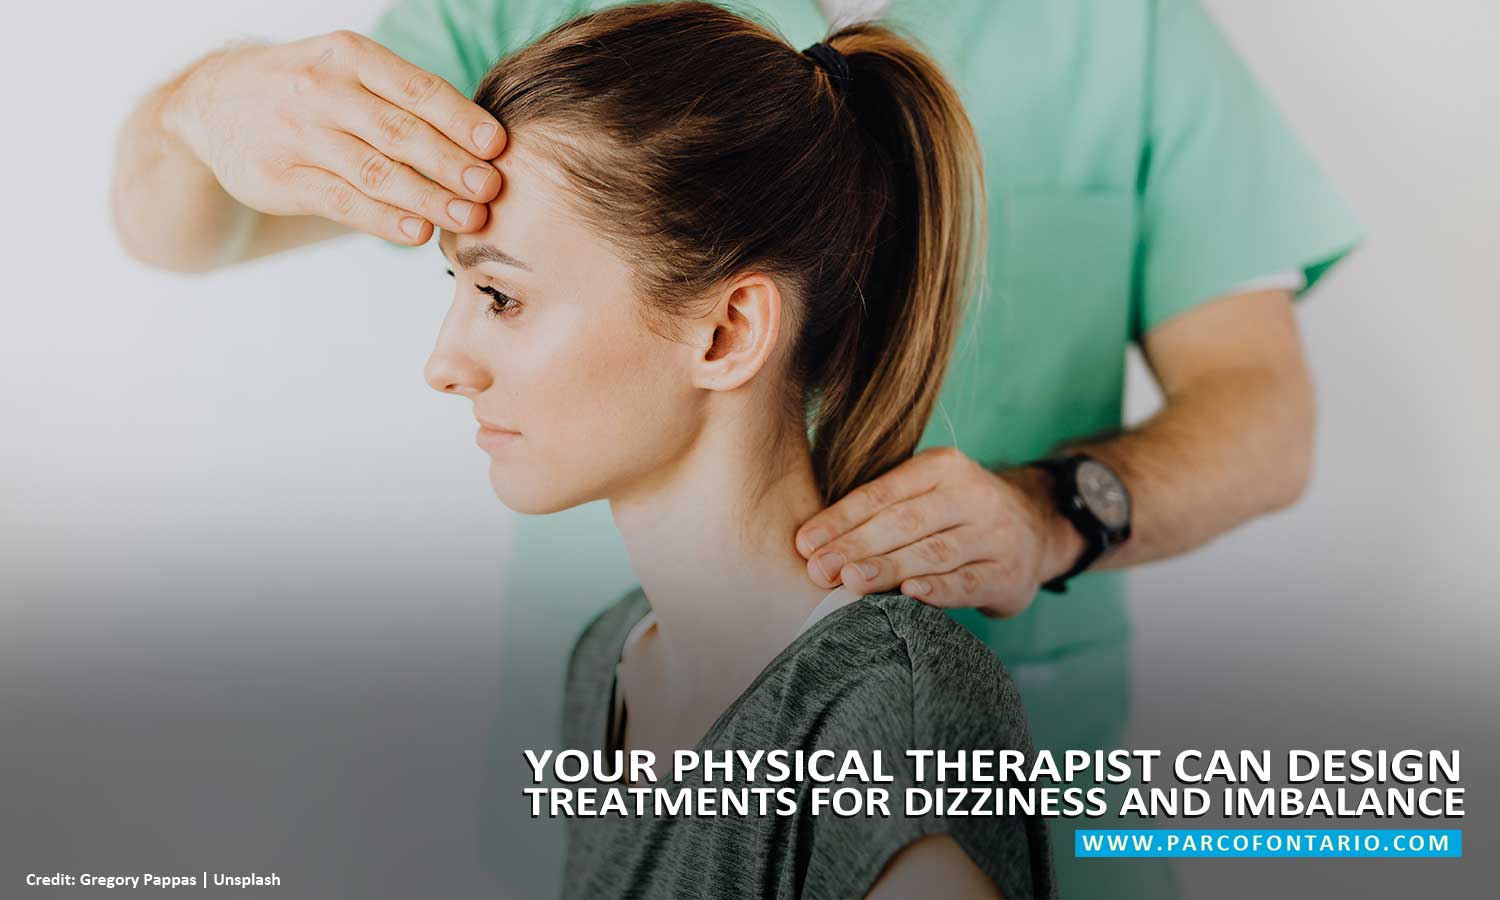 Your-physical-therapist-can-design-treatments-for-dizziness-and-imbalance